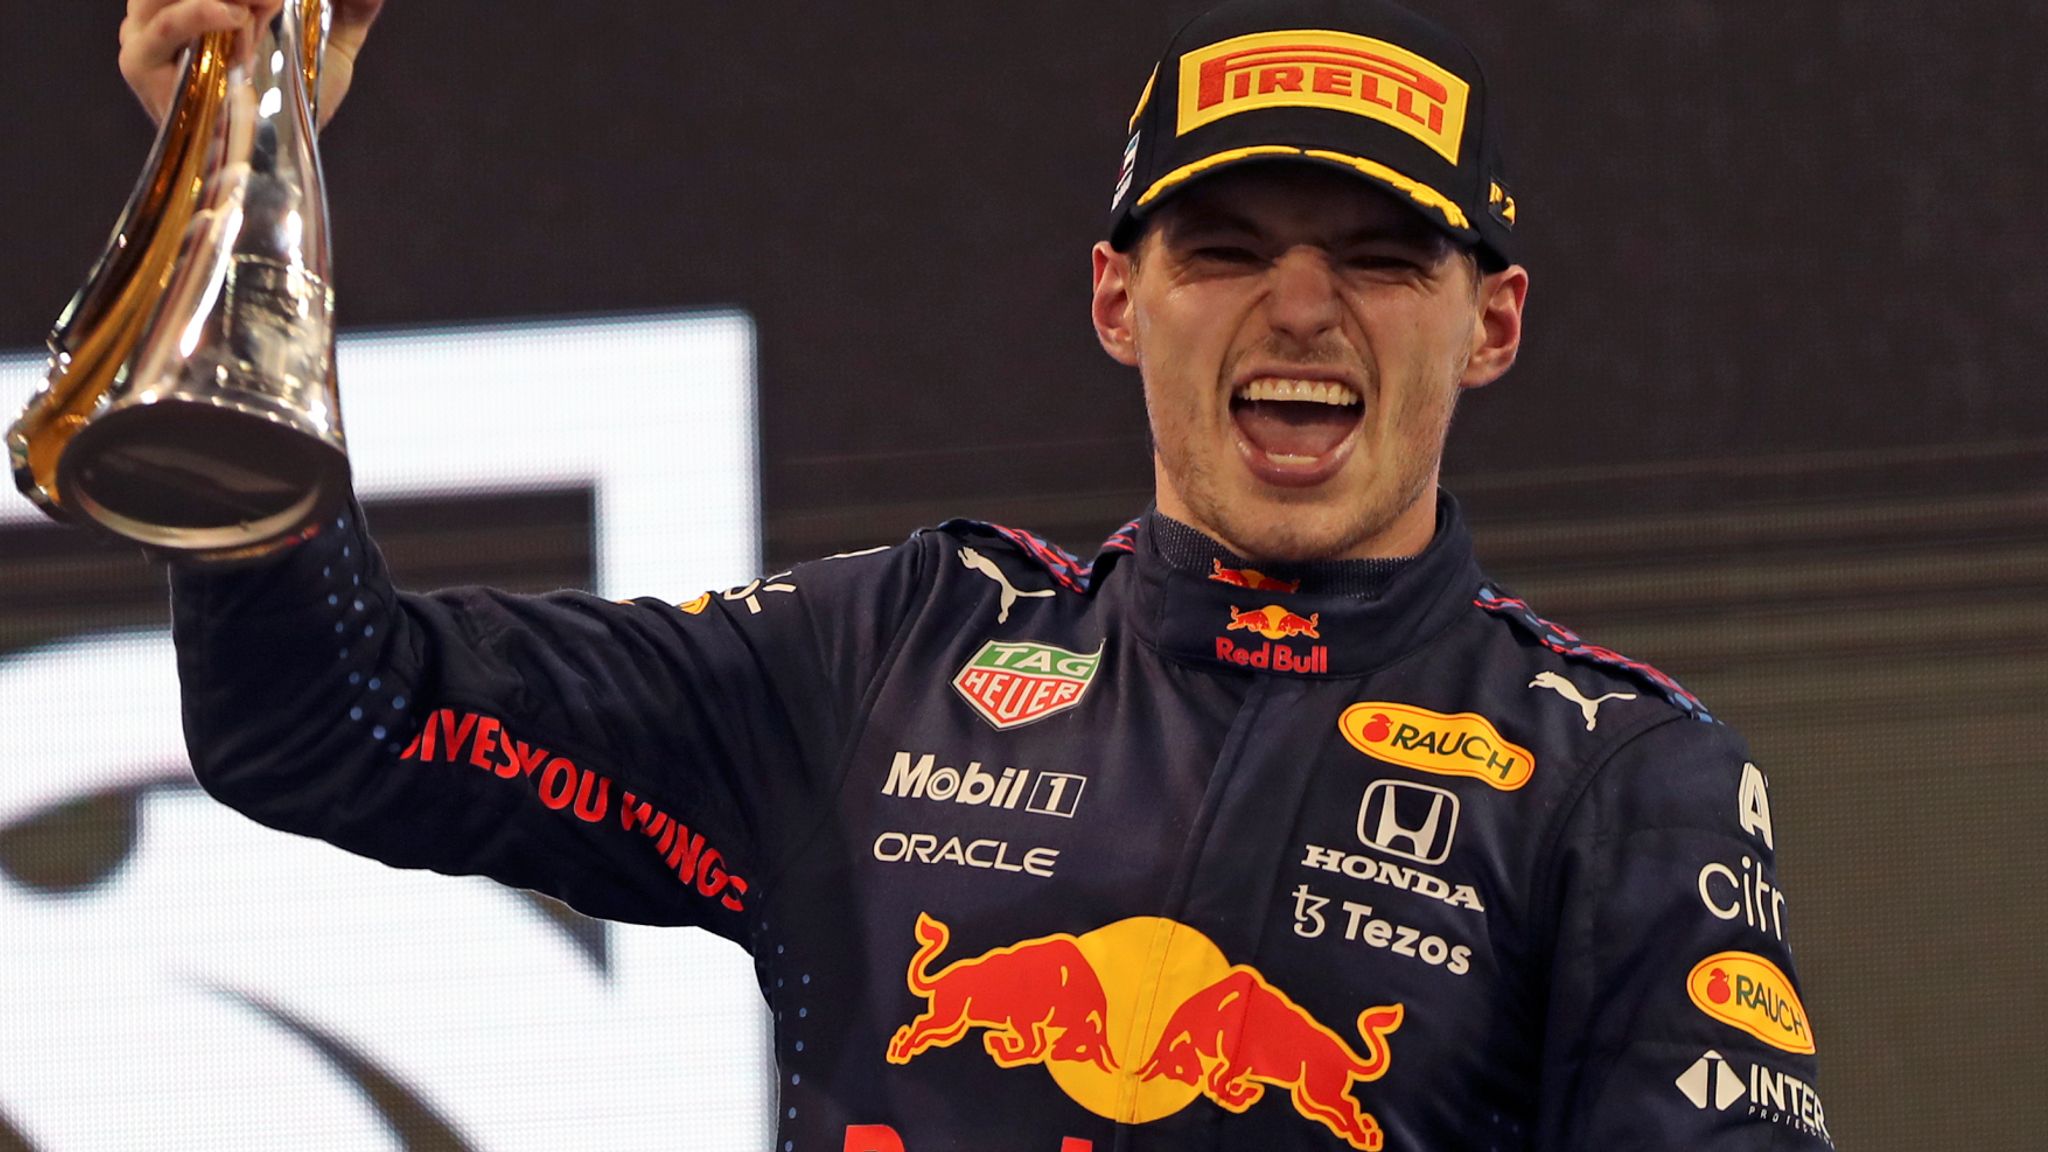 Max Verstappen confirmed as F1 champion after Mercedes protests rejected at Abu Dhabi GP | F1 News